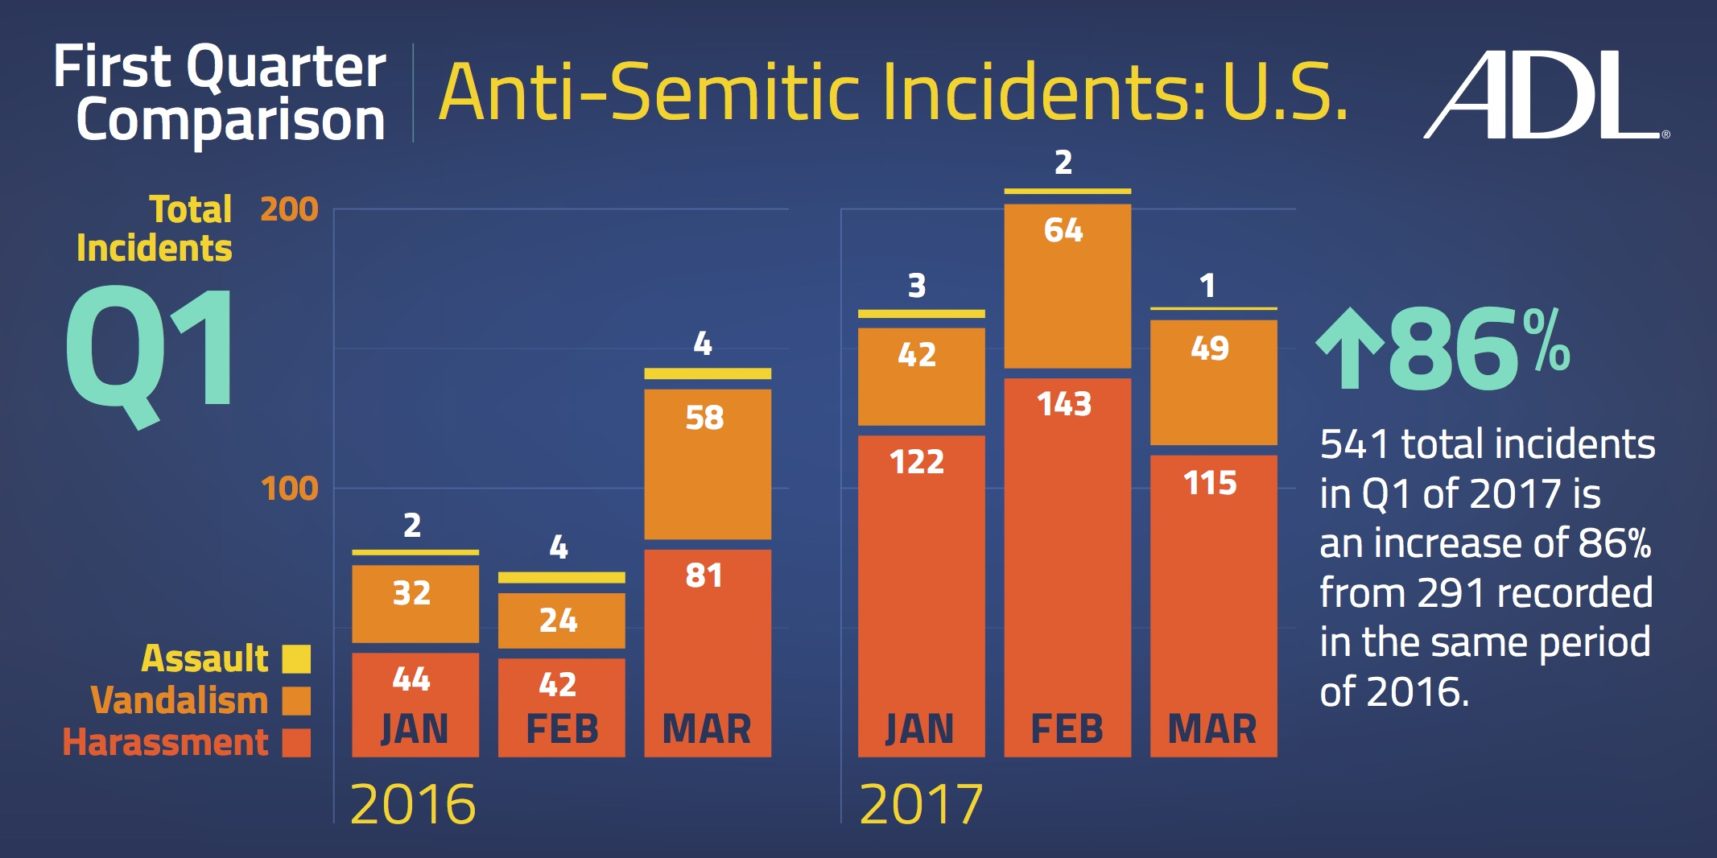 Graphic courtesy of ADL.